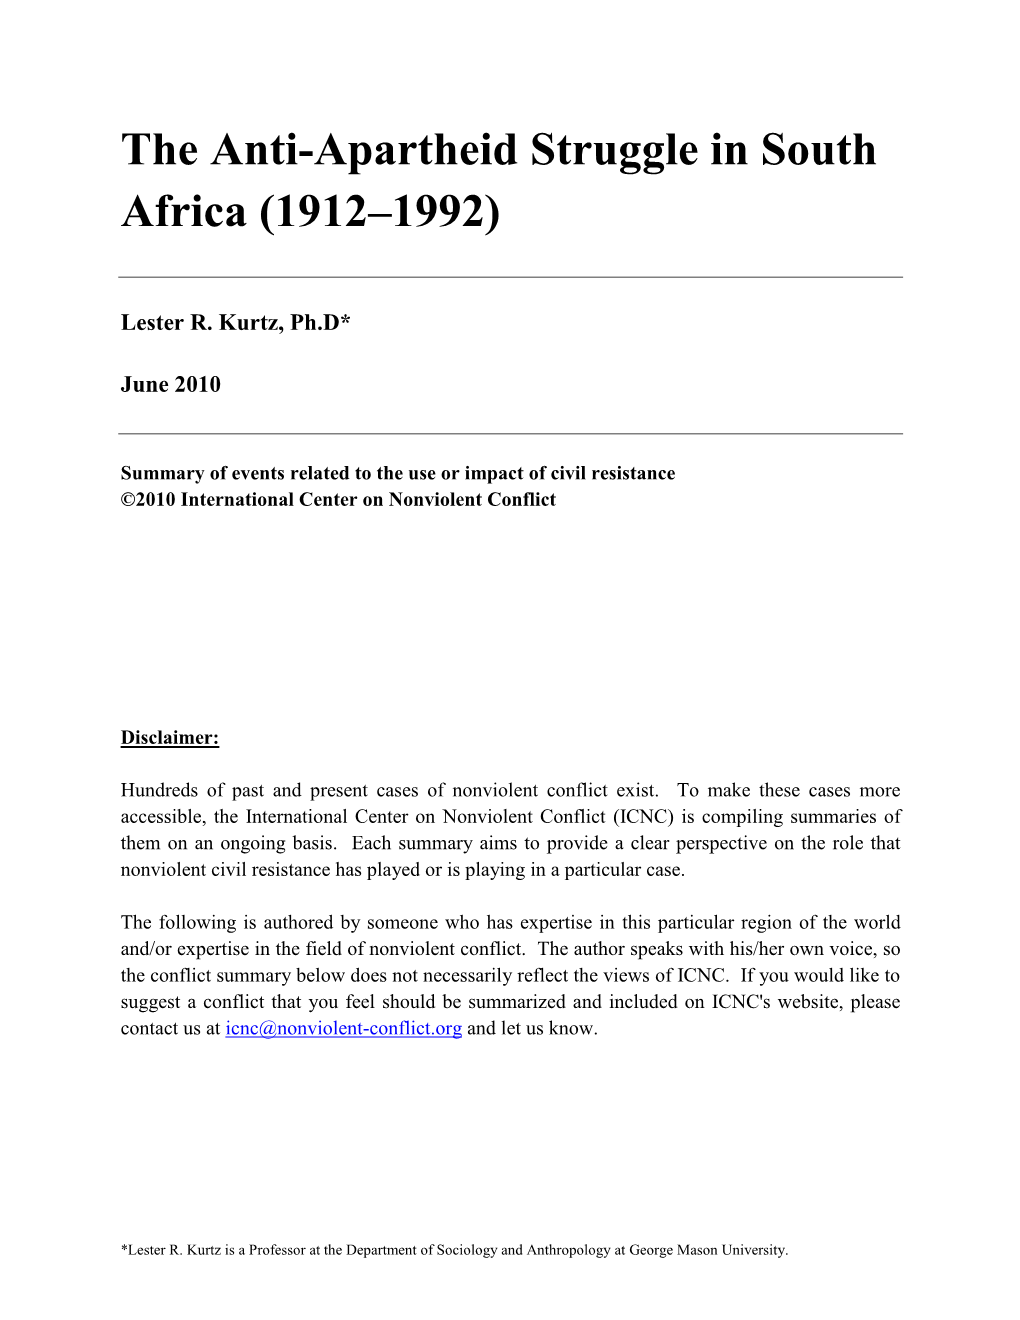 The Anti-Apartheid Struggle in South Africa (1912–1992)